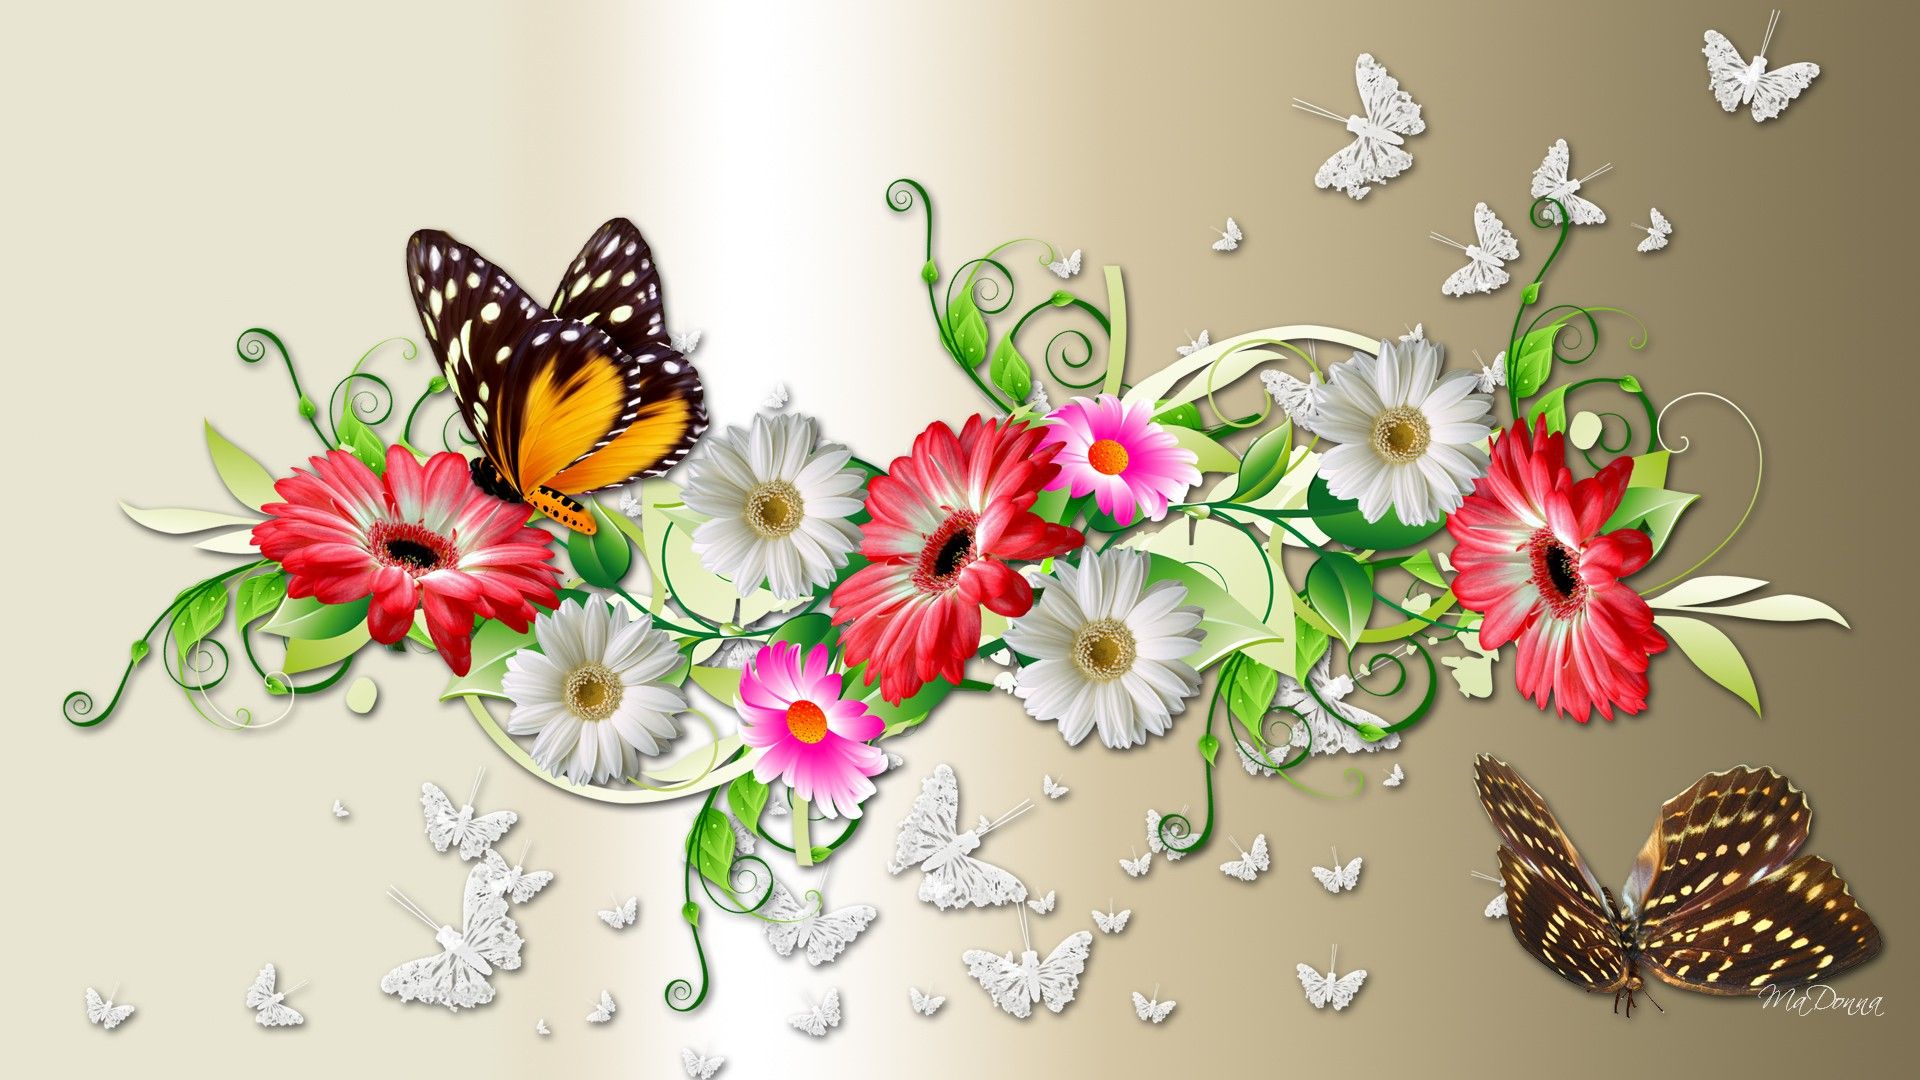 Spring #Flowers And #Butterflies. Butterfly wallpaper, Spring flowers wallpaper, Butterfly background